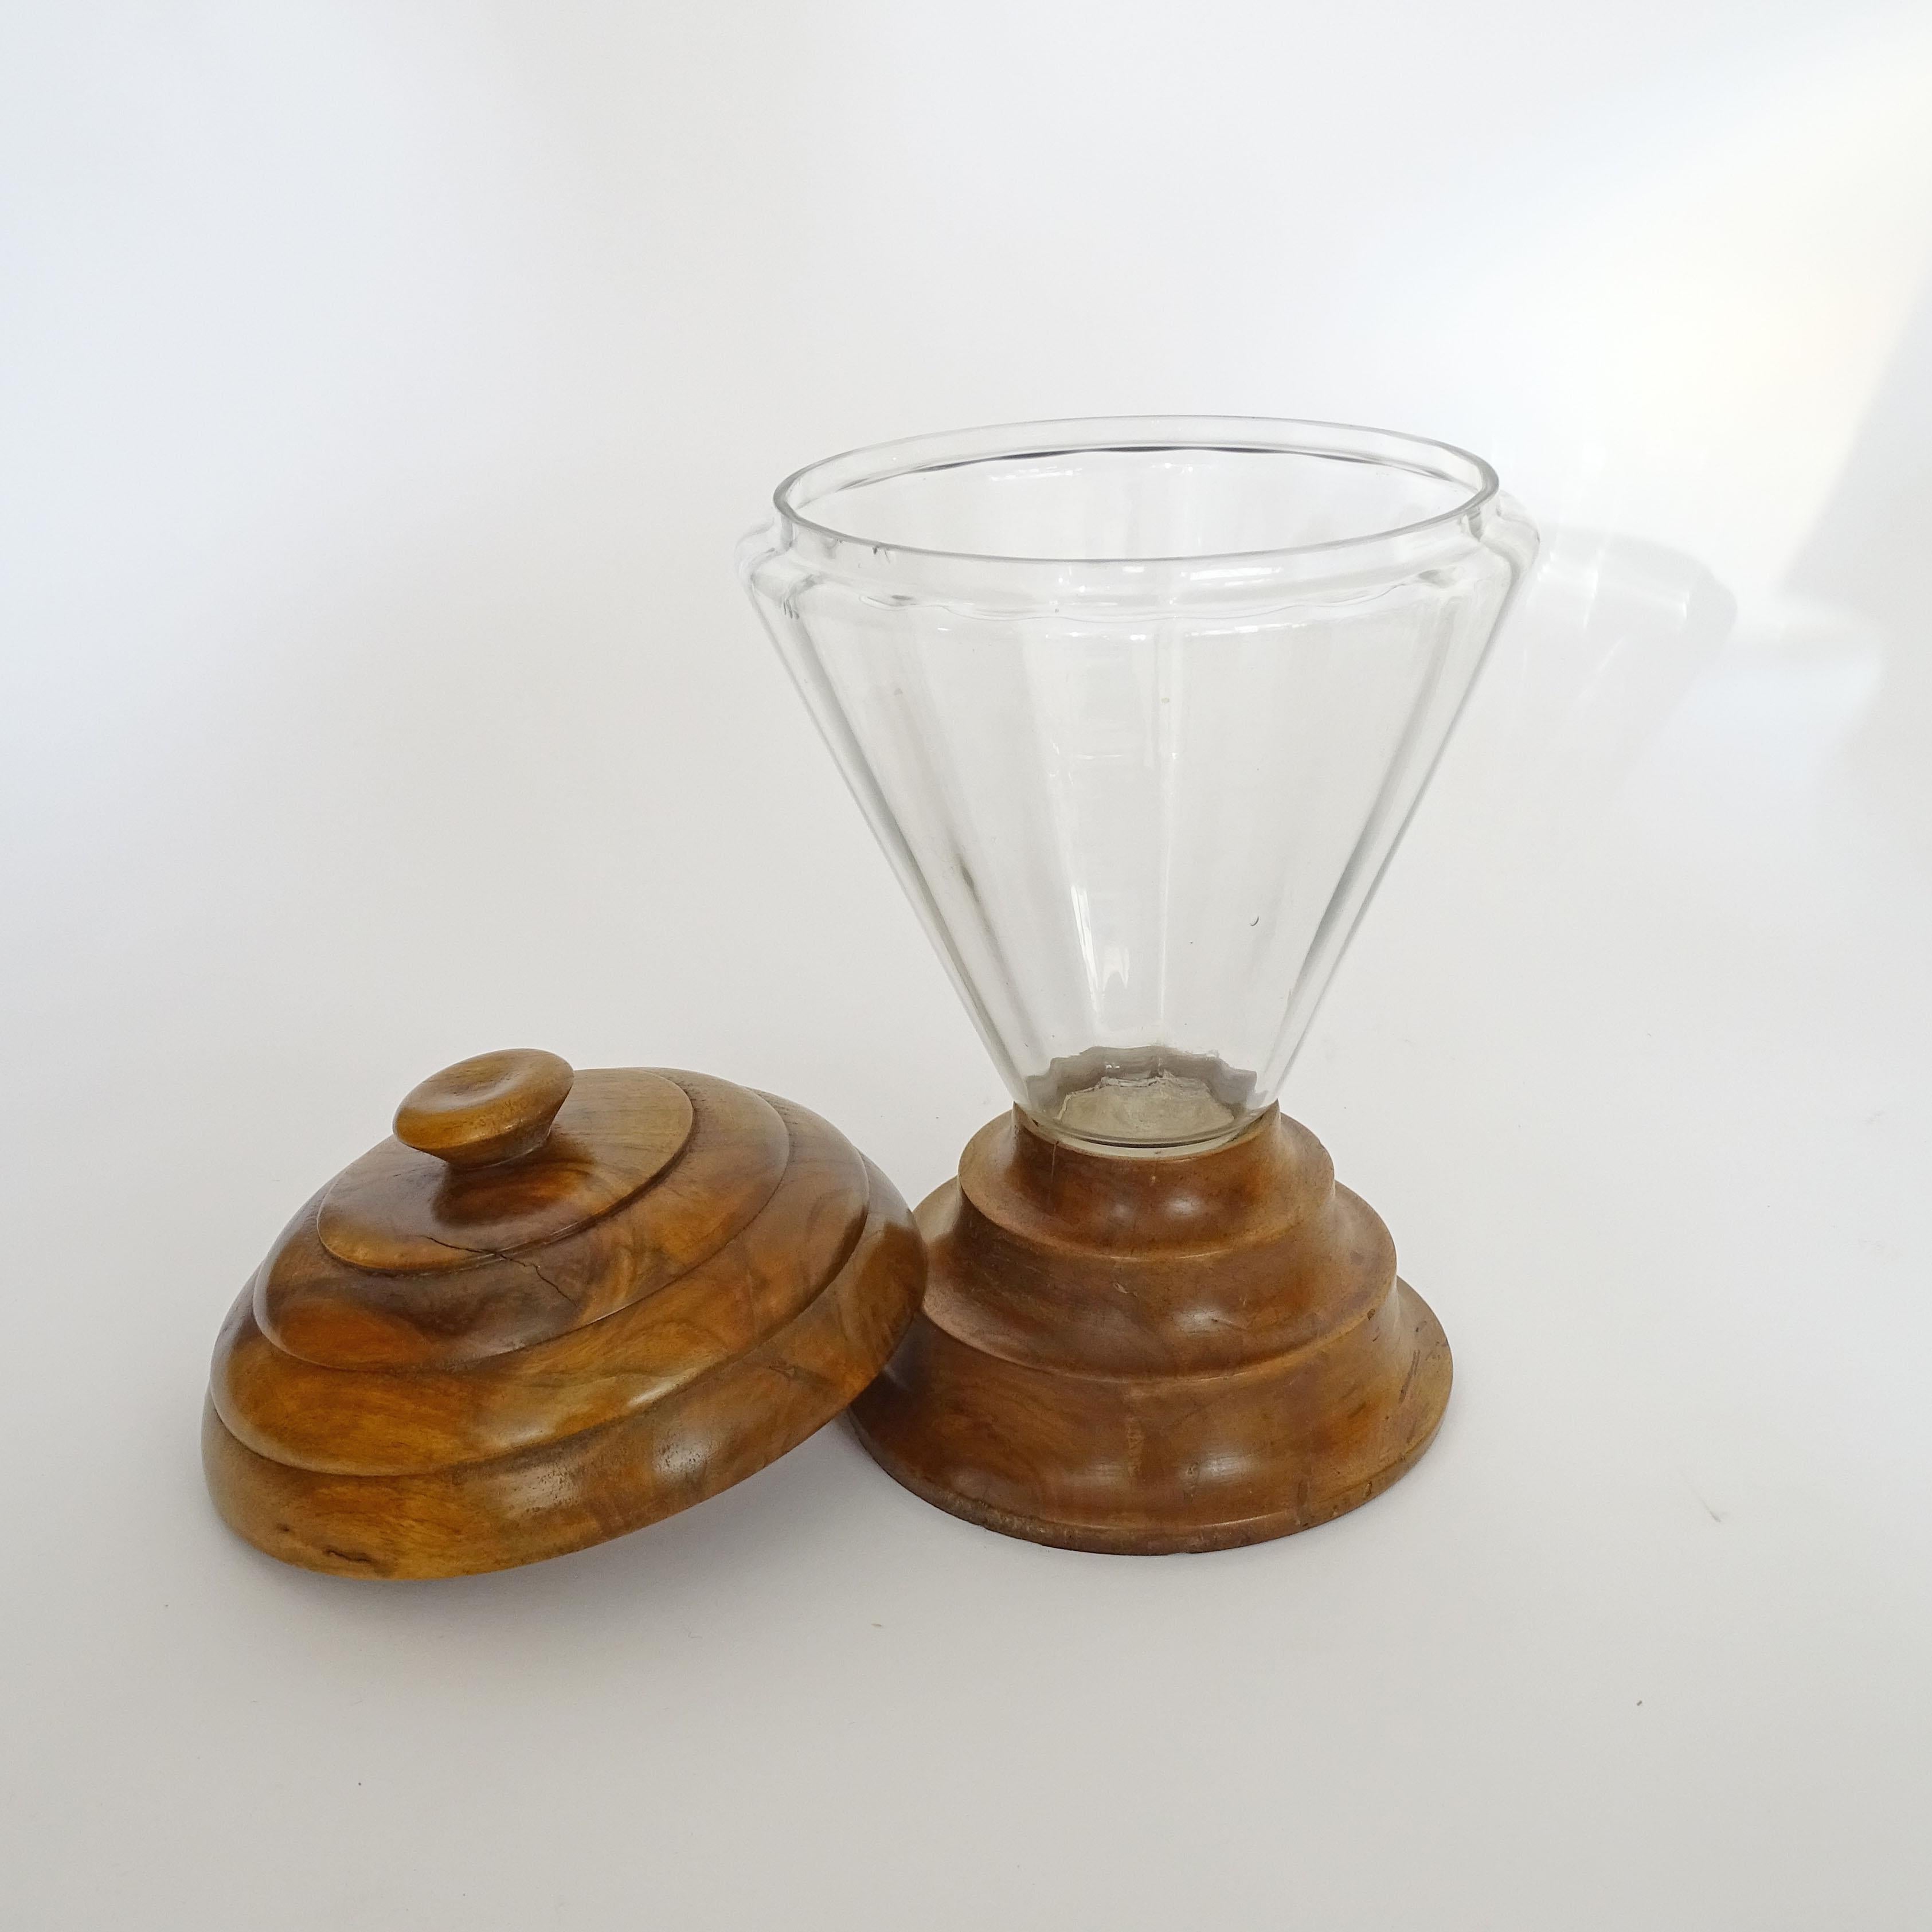 Italian Art Deco Candy Jar in Glass and Wood, 1930s For Sale 1